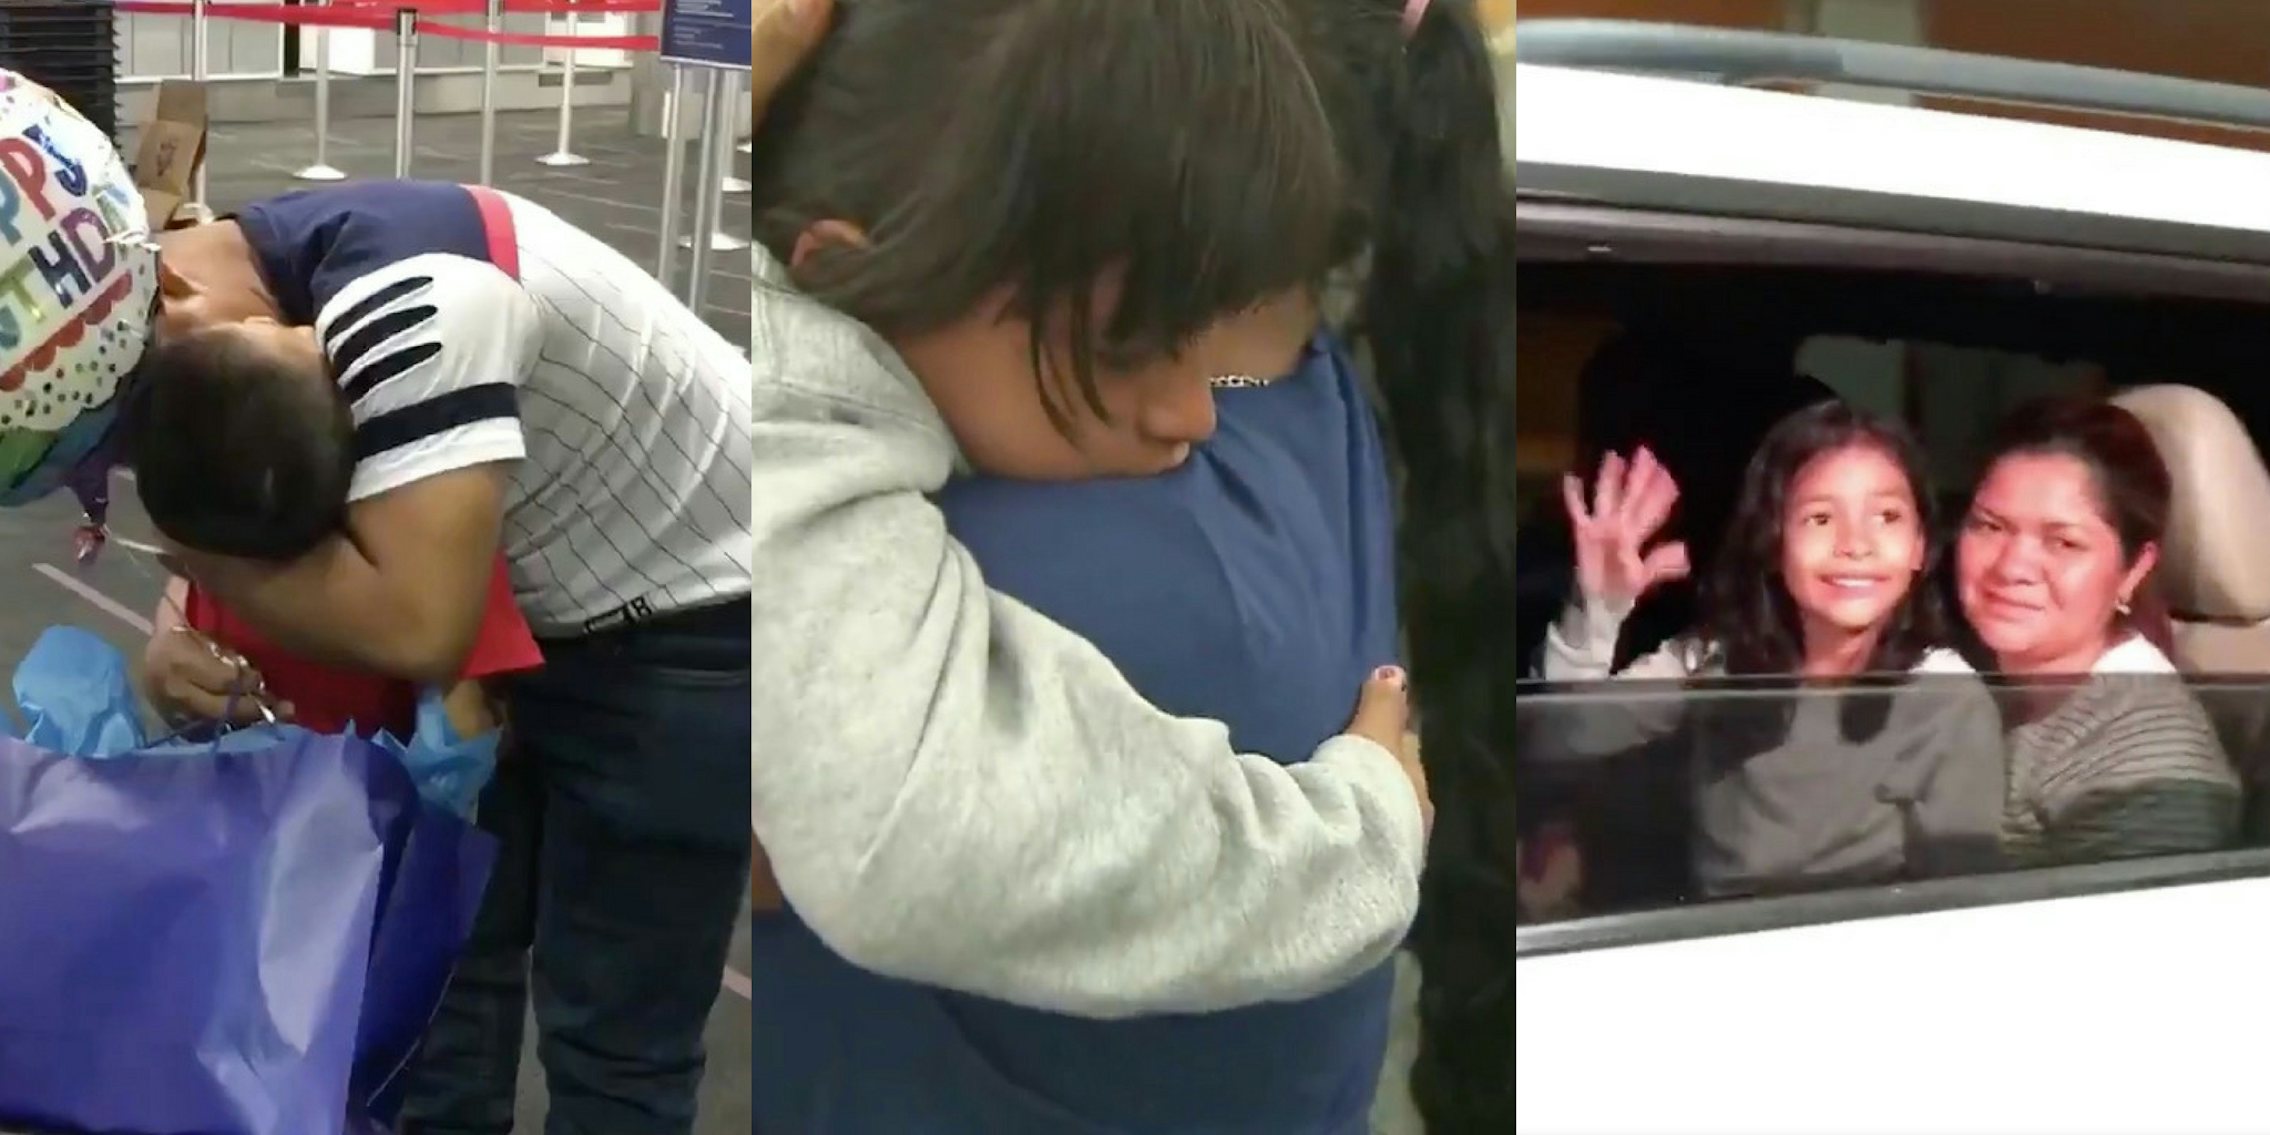 Immigrant children are being reunited with their parents.